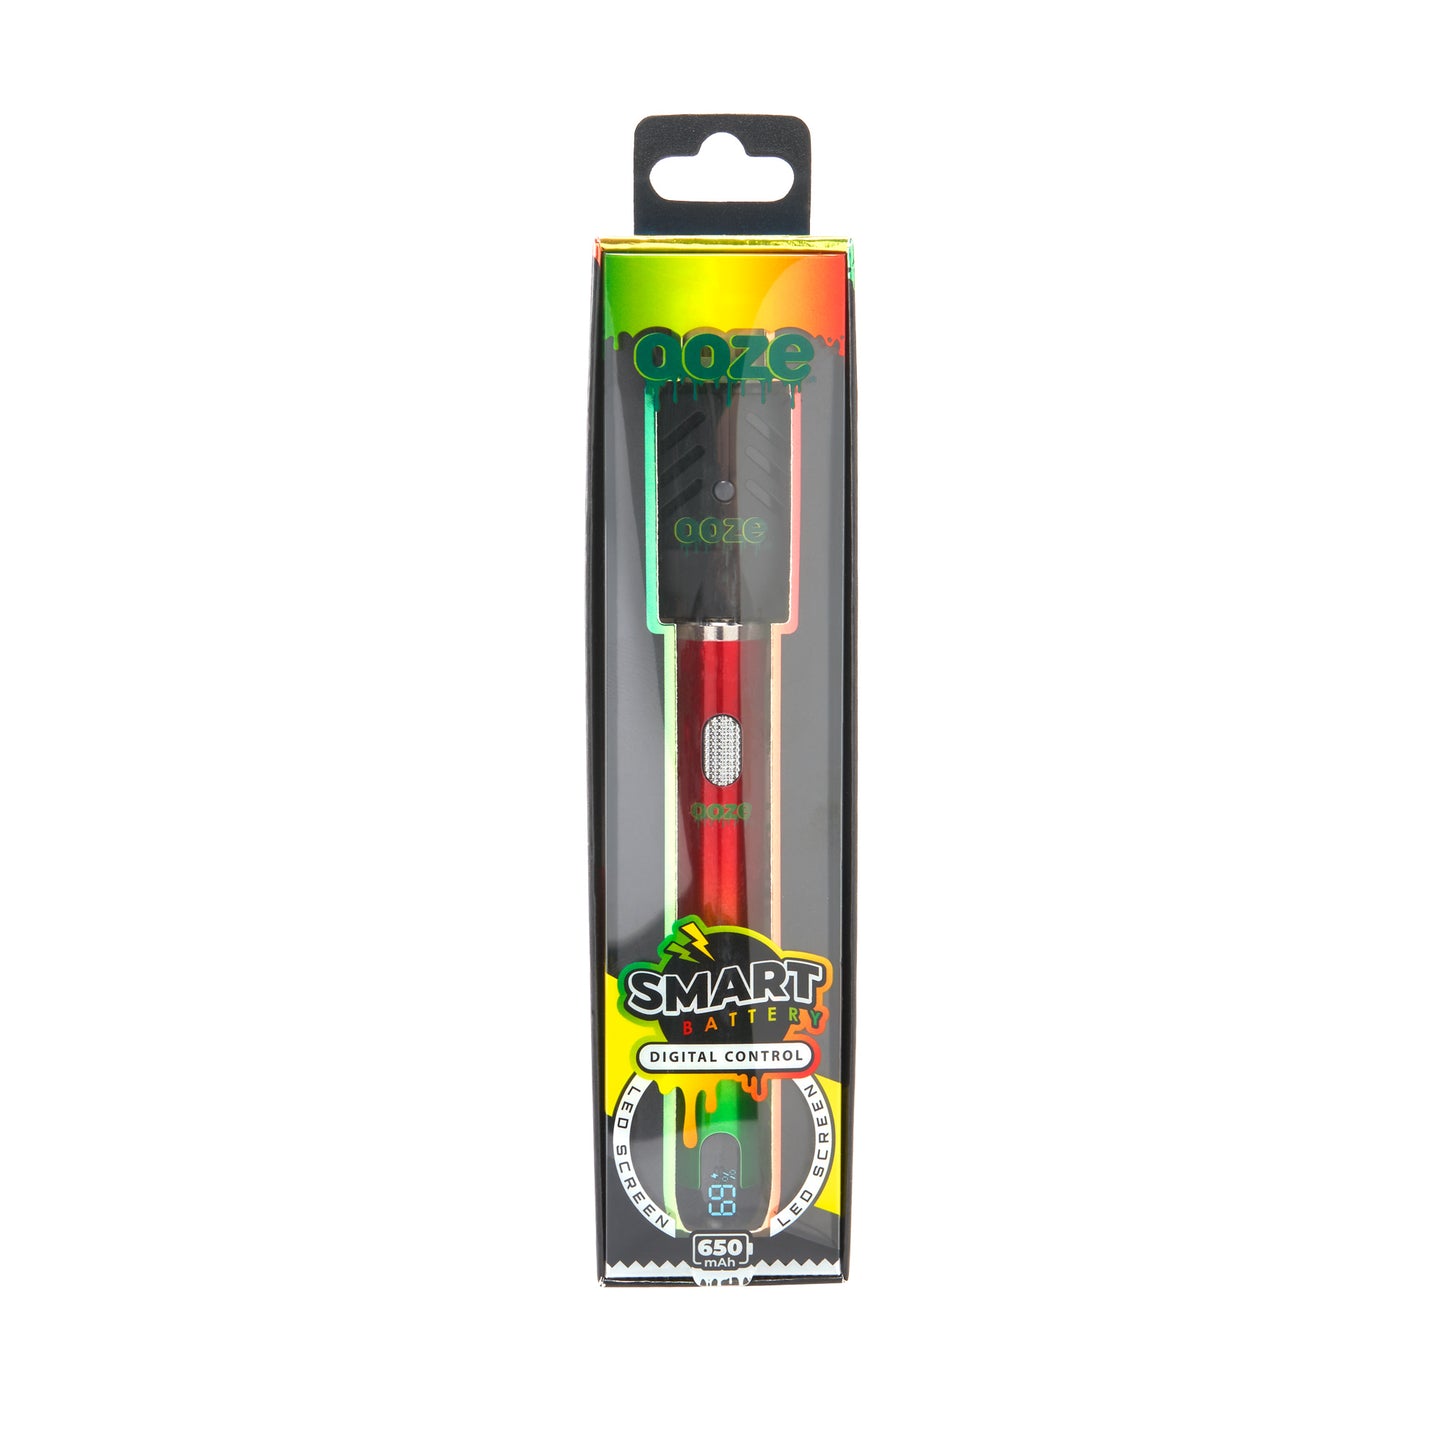 The rasta Ooze Smart Battery is in the box